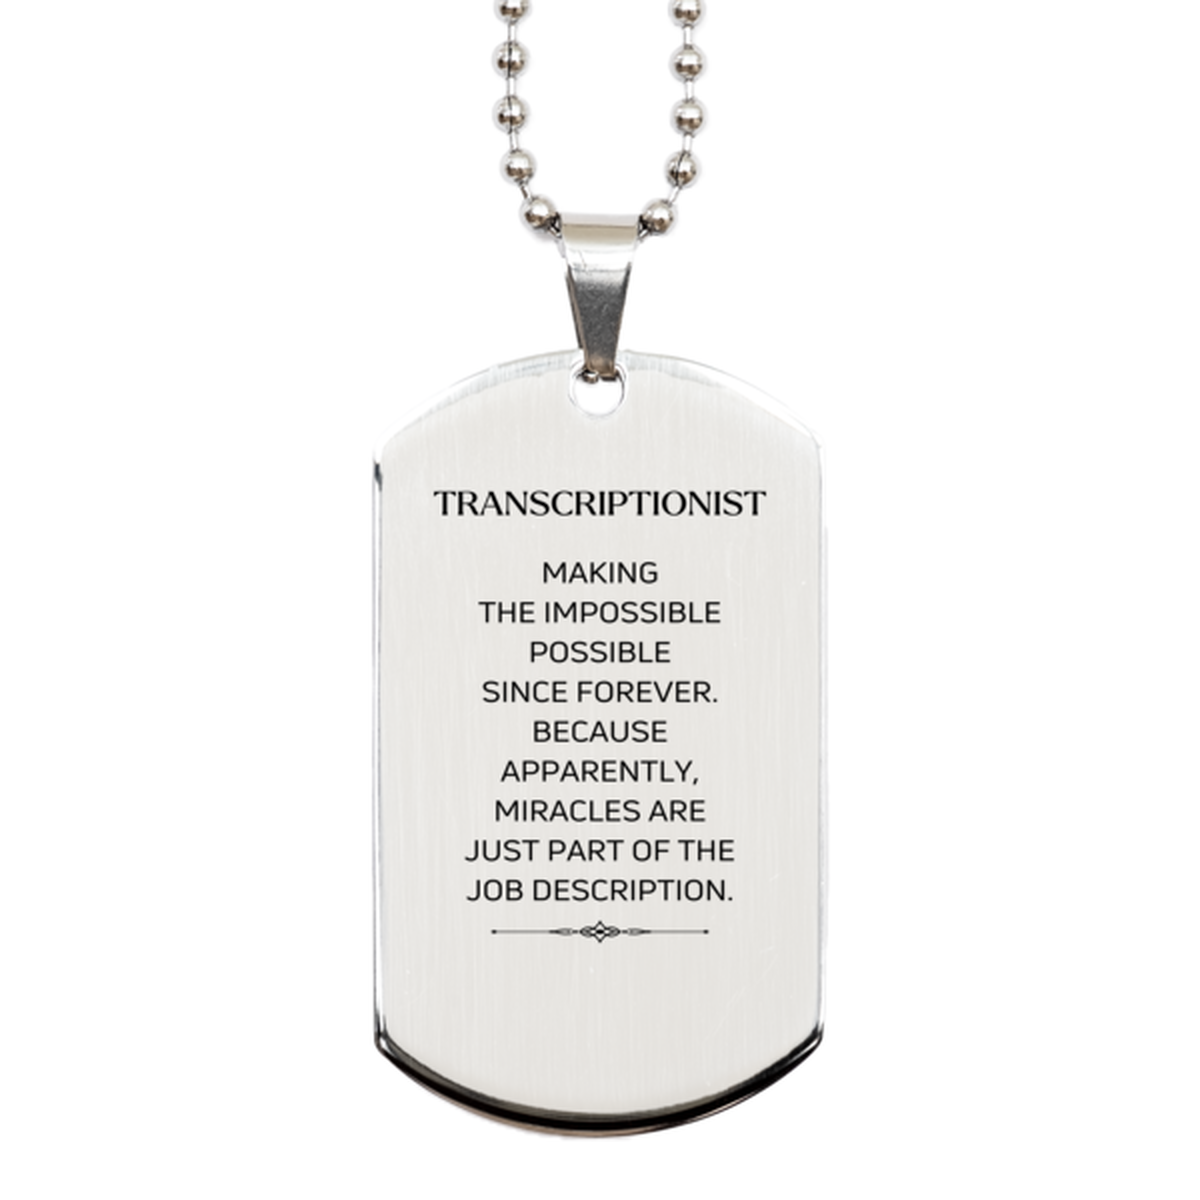 Funny Transcriptionist Gifts, Miracles are just part of the job description, Inspirational Birthday Silver Dog Tag For Transcriptionist, Men, Women, Coworkers, Friends, Boss